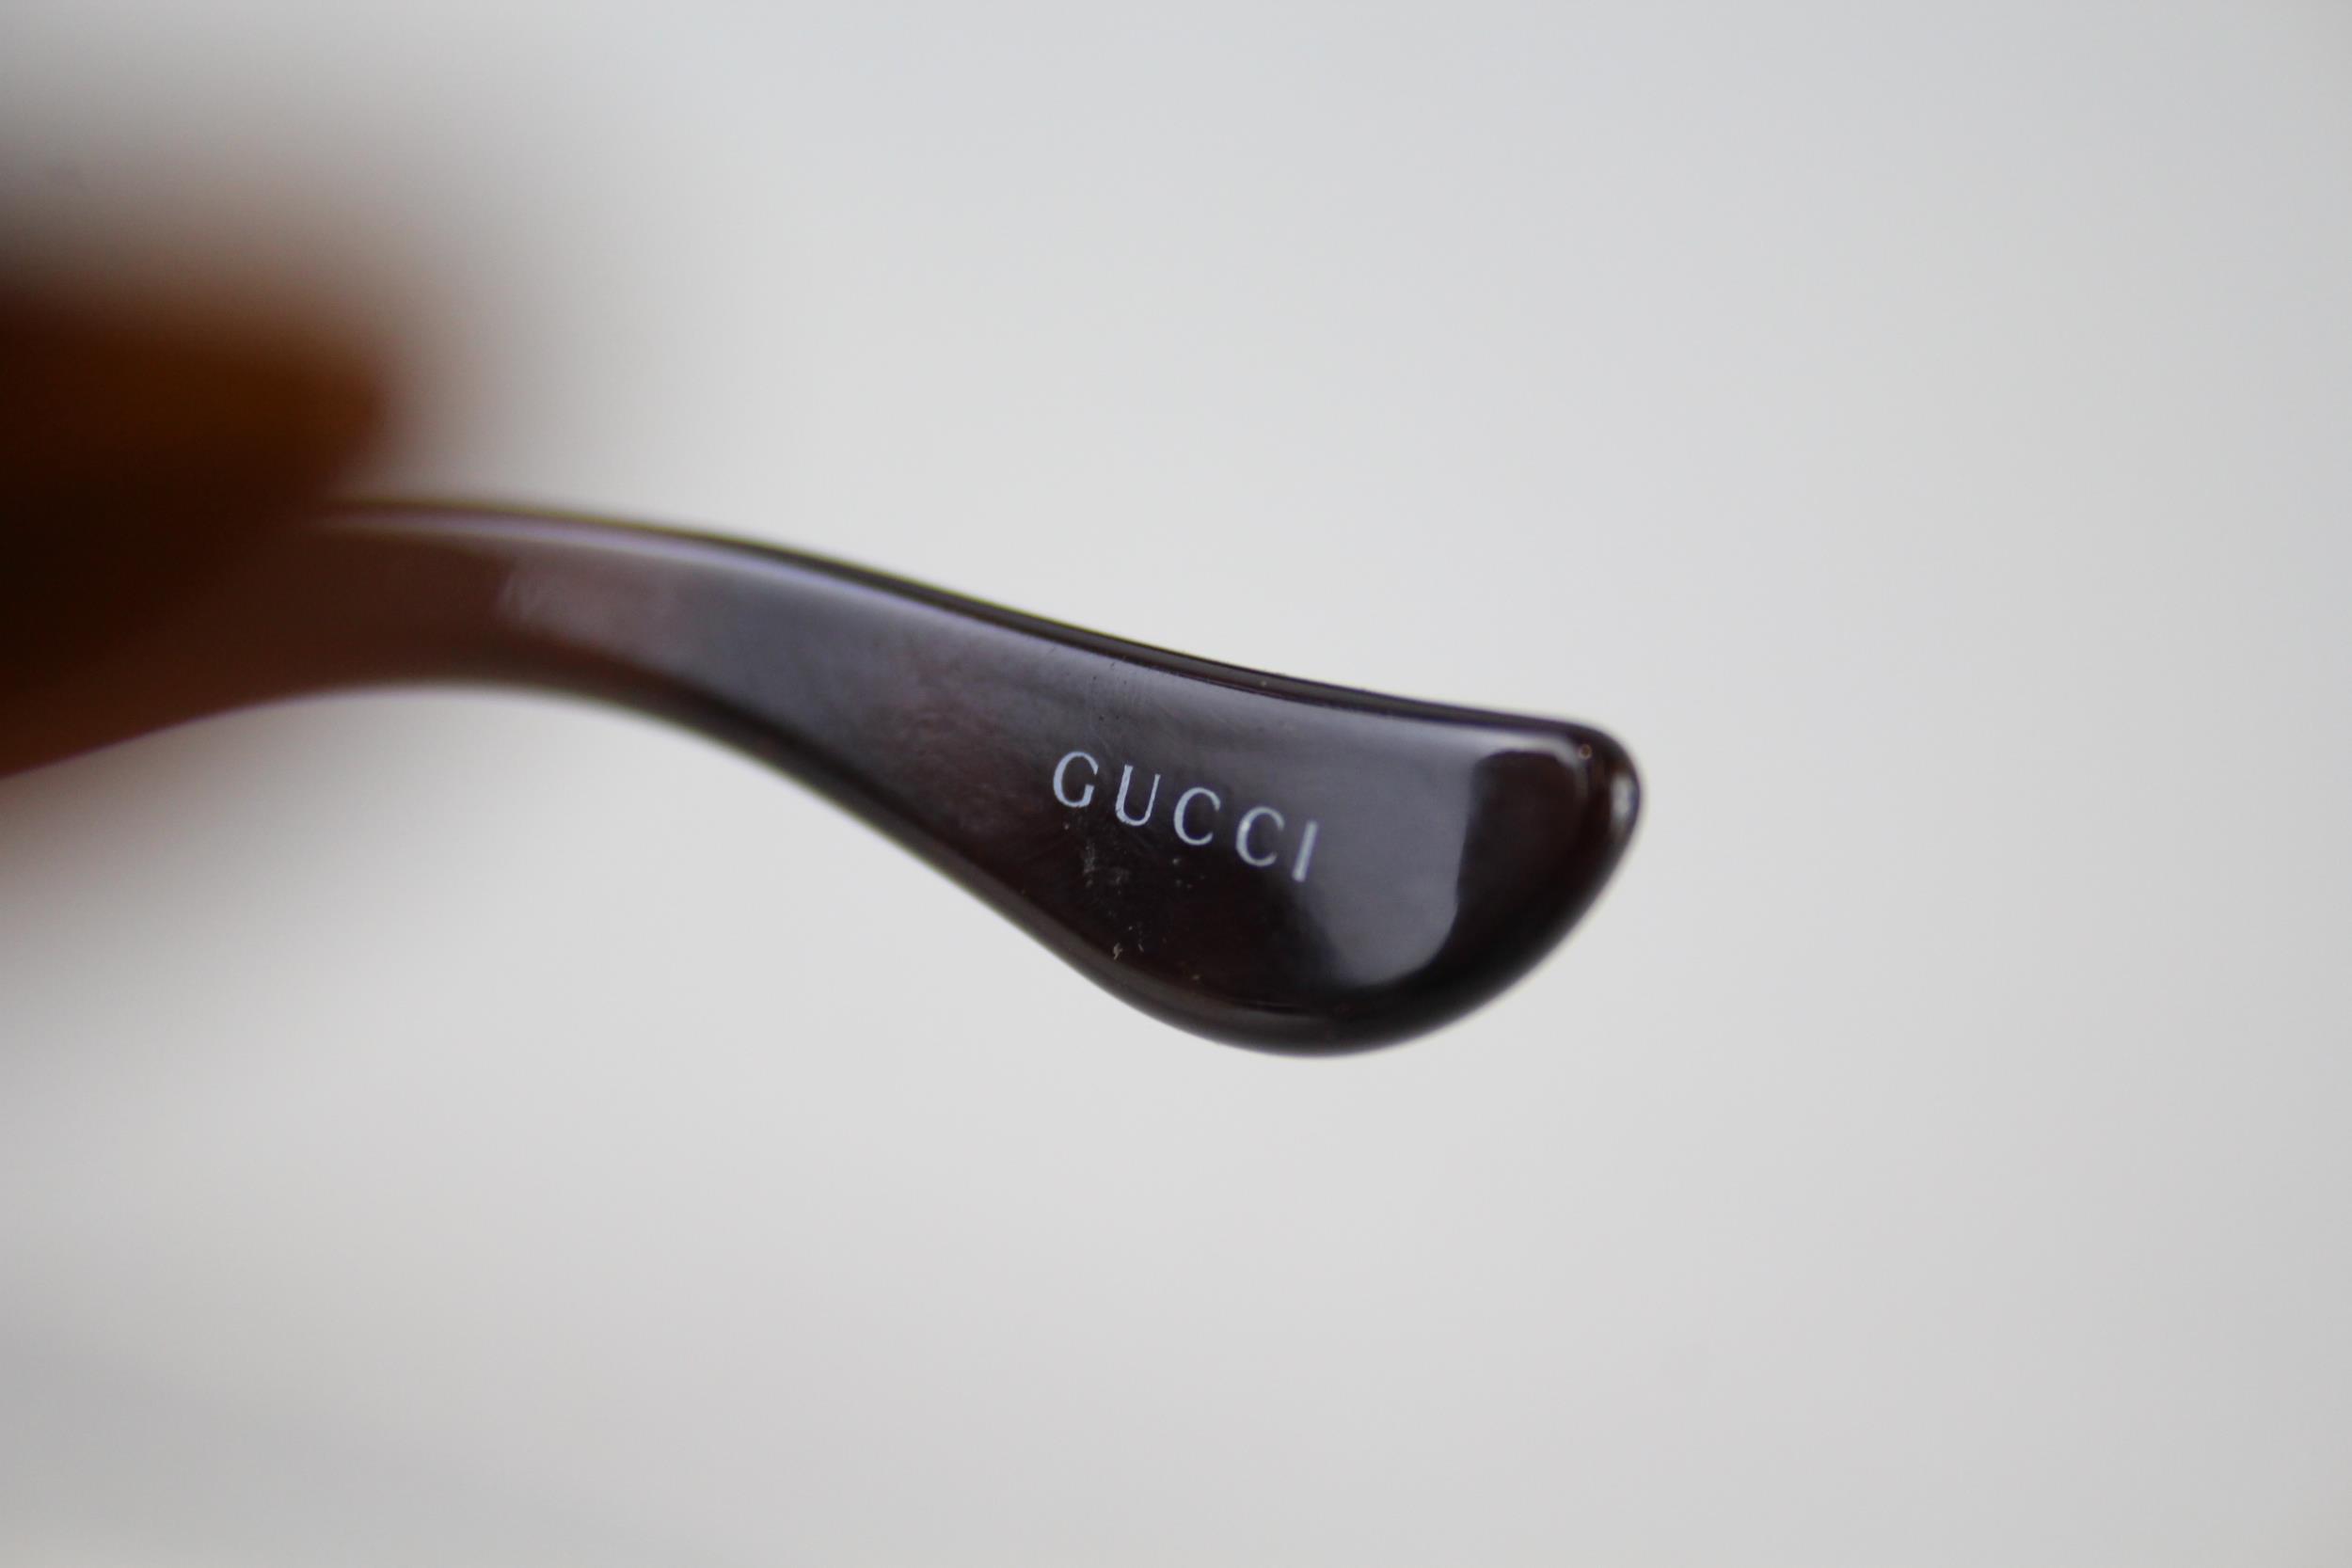 Designer Gucci Sunglasses In Case - Items are in previously owned condition Signs of age & wear - Image 5 of 8